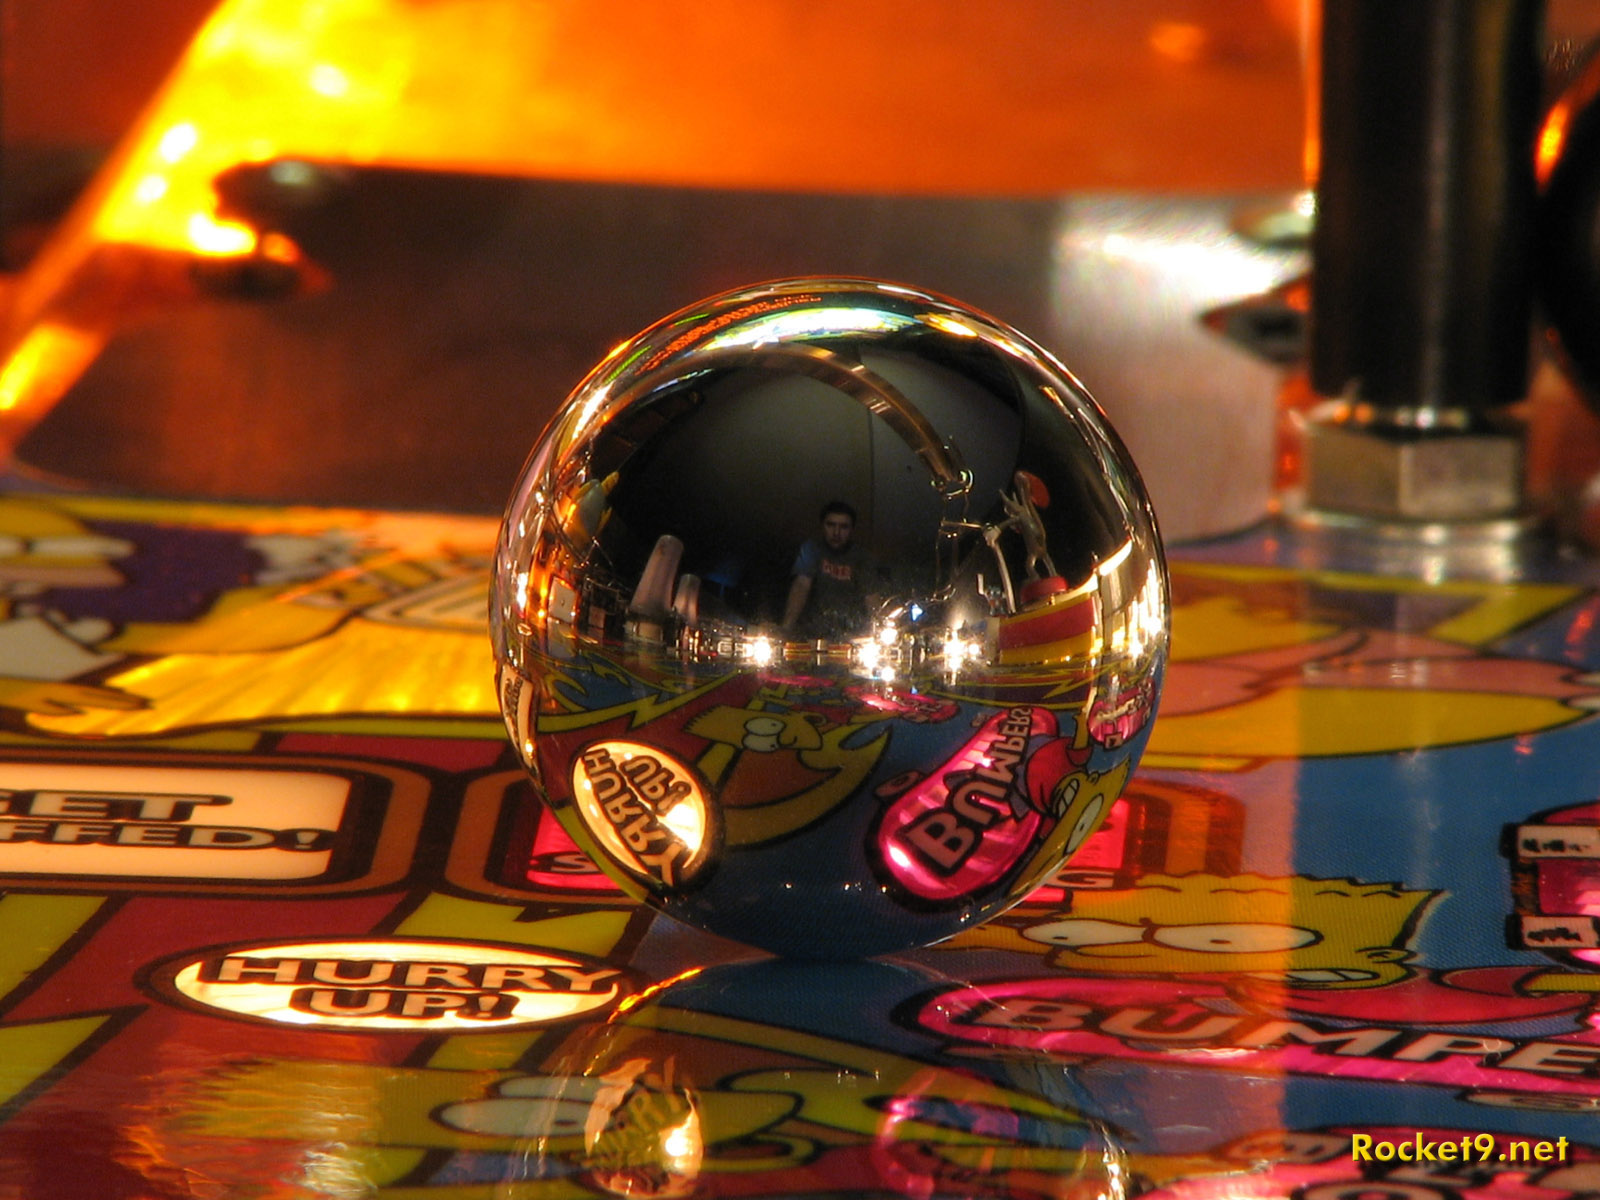 pinball in motion